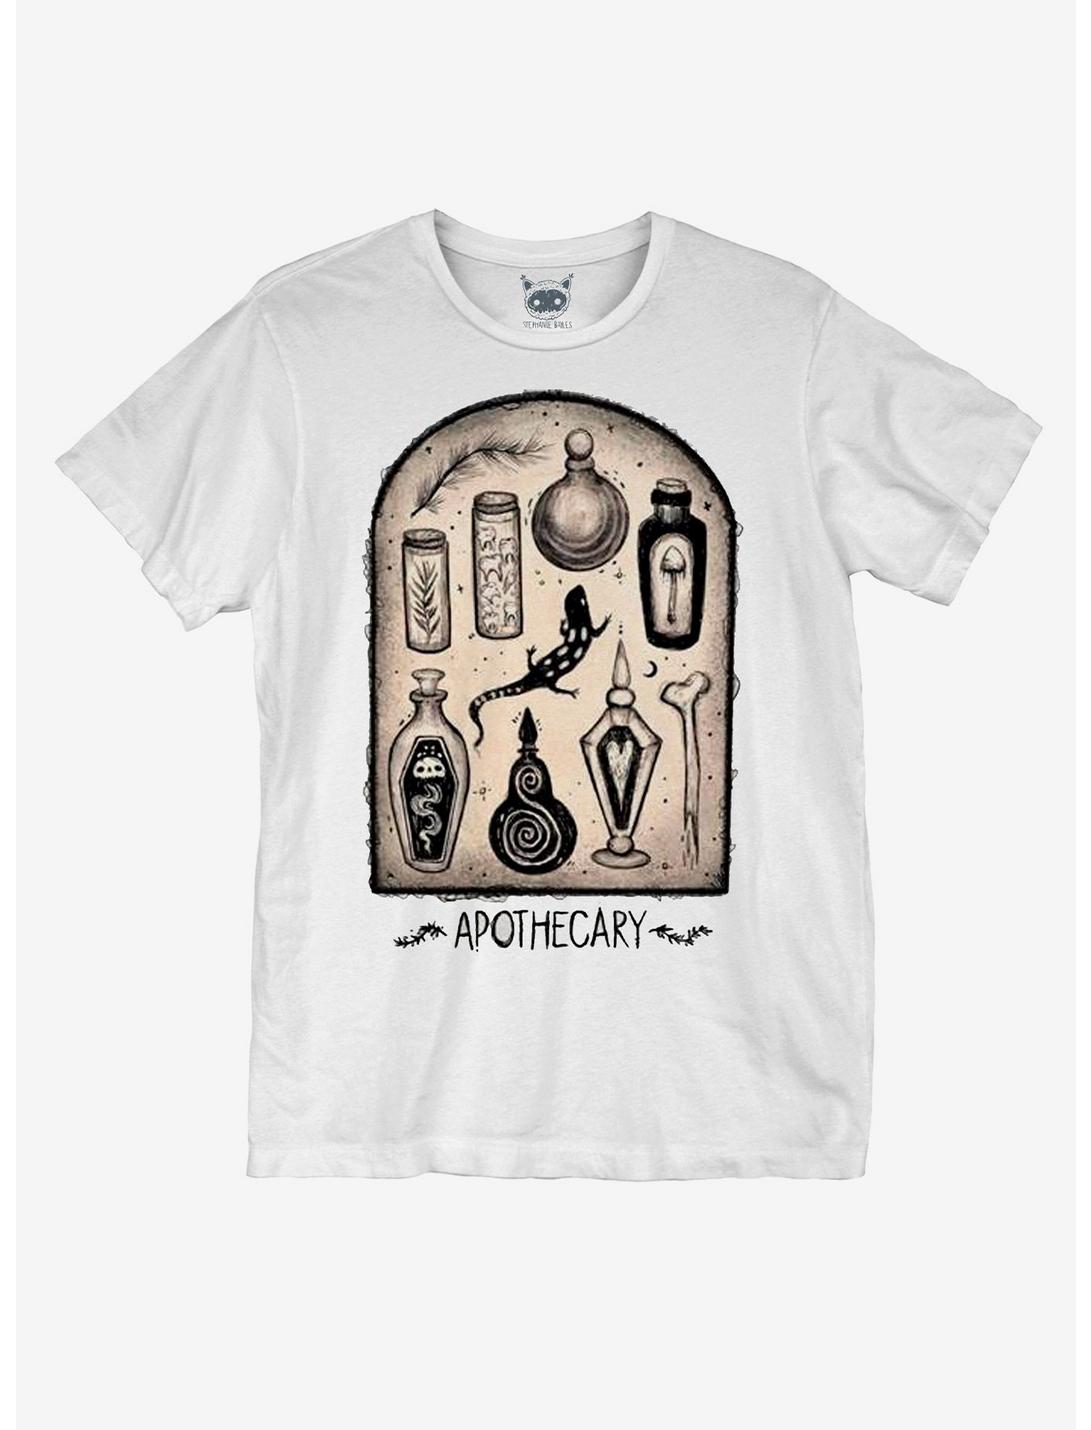 Apothecary T-Shirt By Guild Of Calamity, BLACK, hi-res